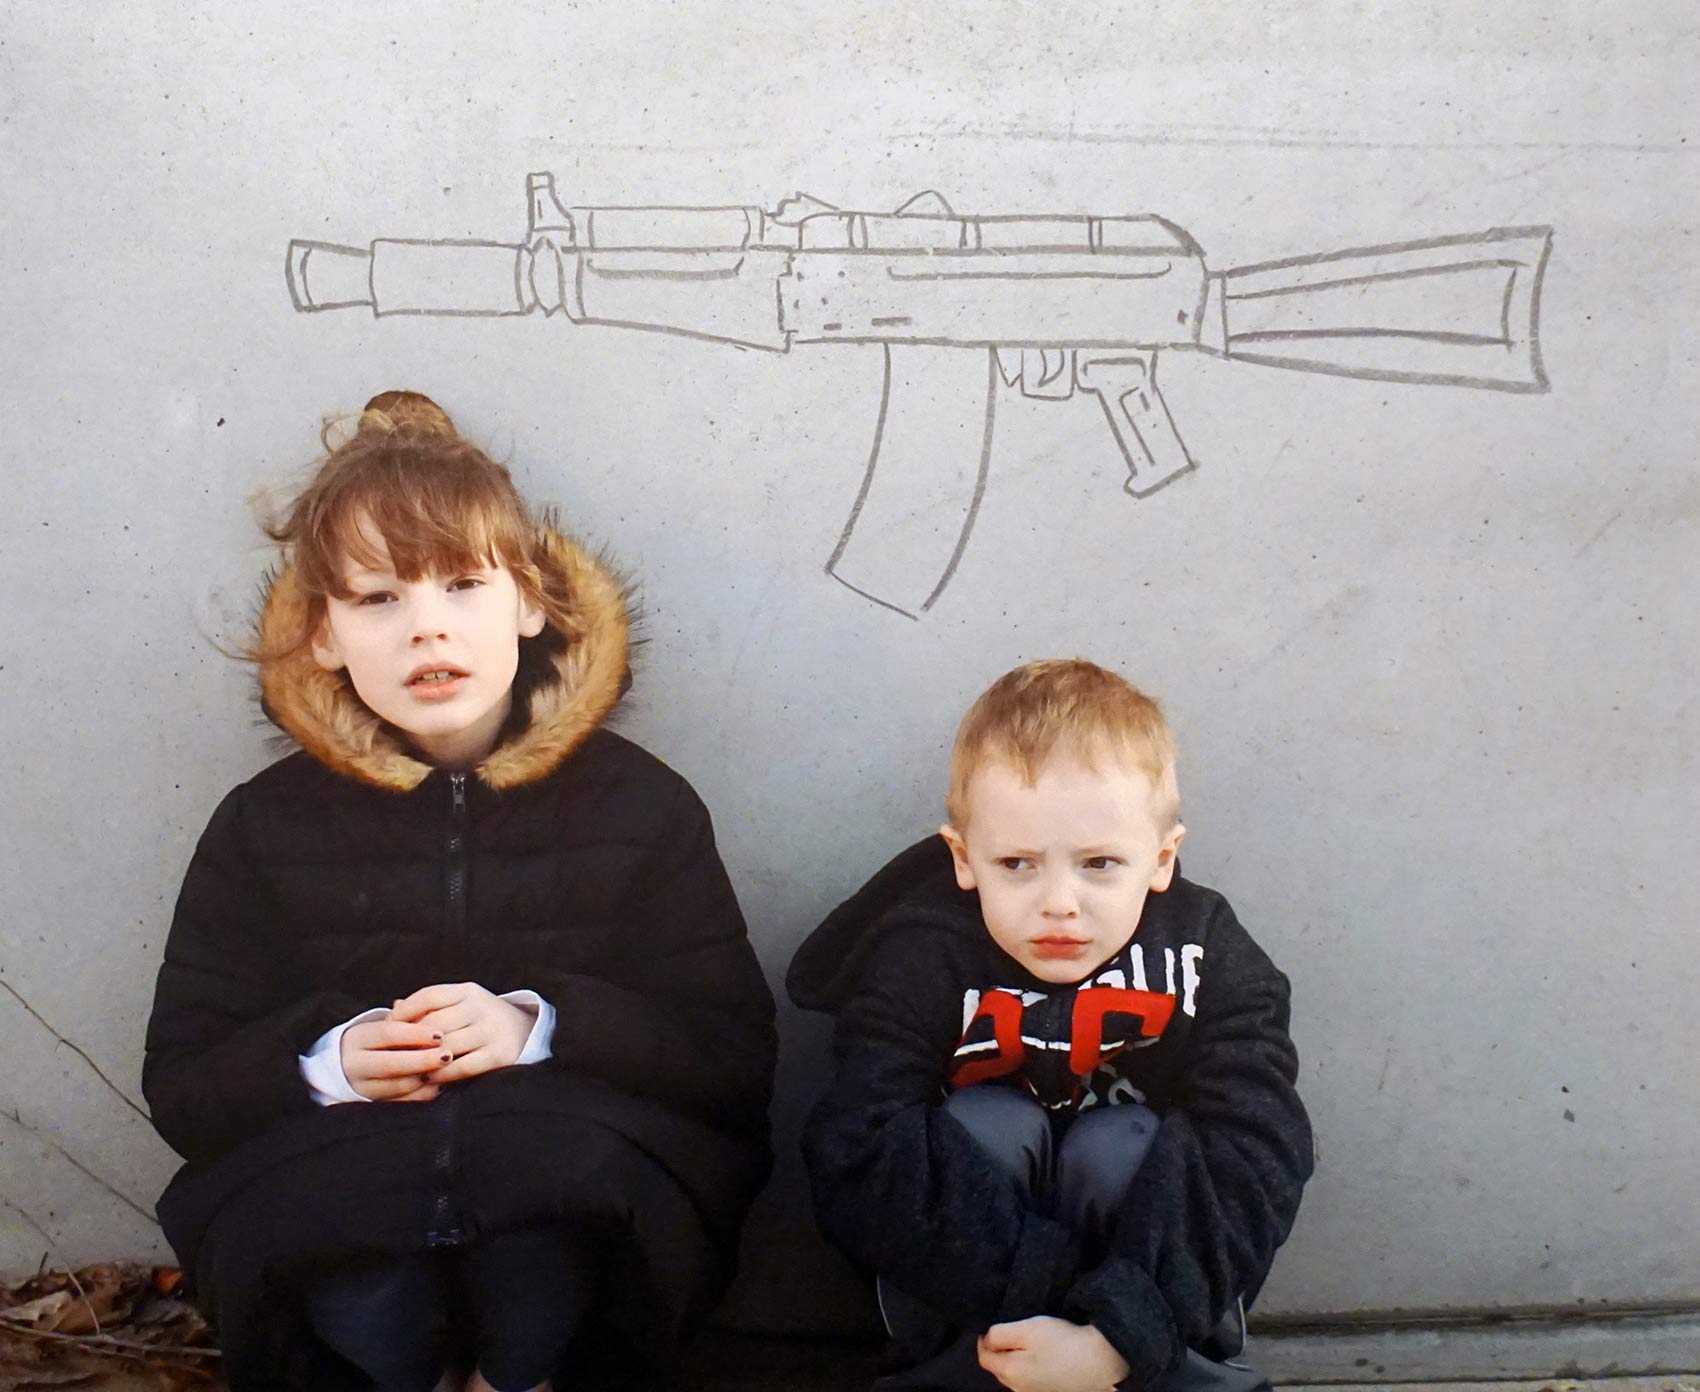 A photograph of two children with a gun drawn on the wall behind them